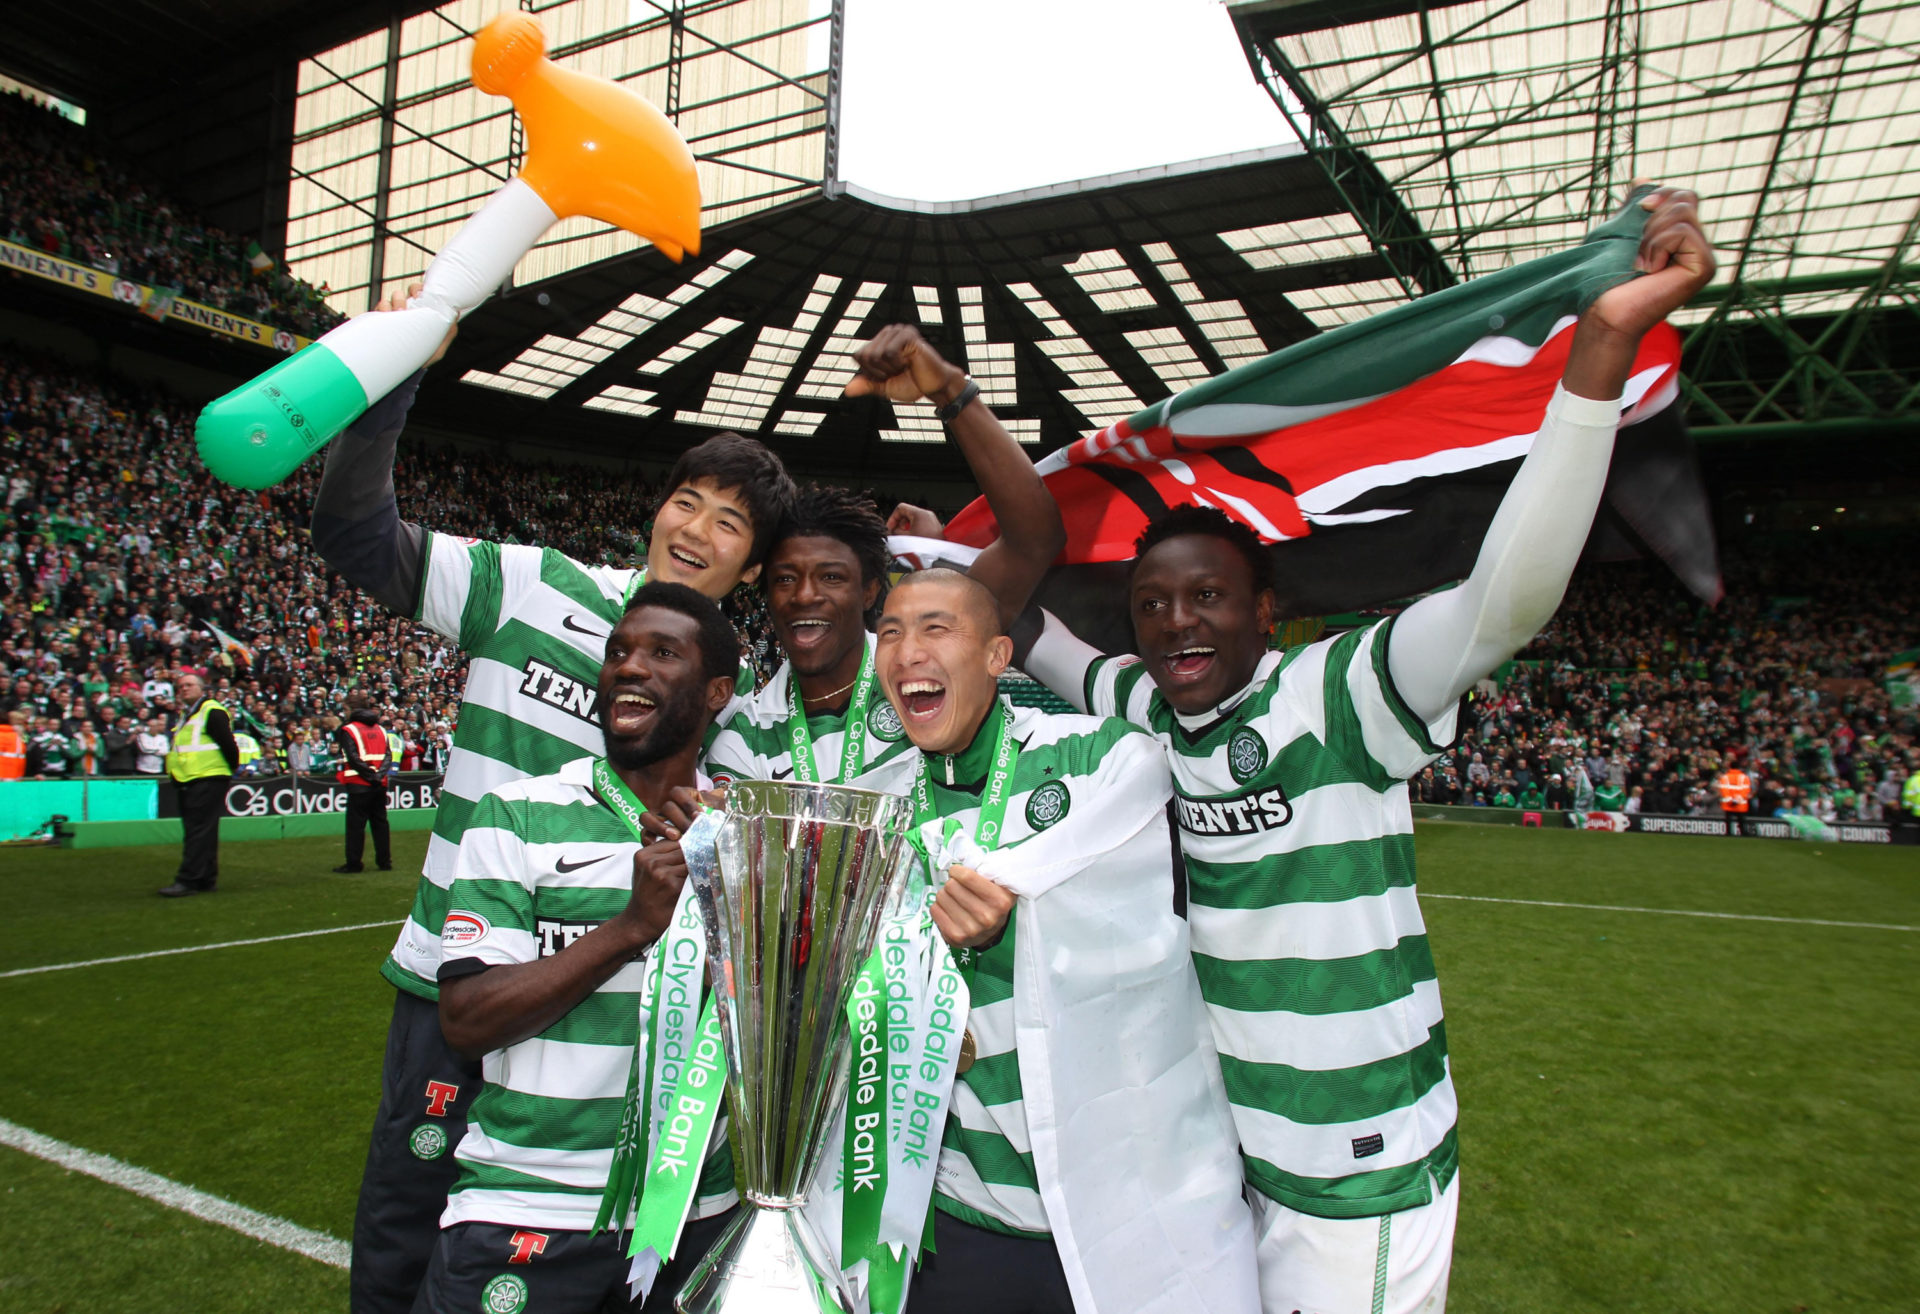 Ki and Cha were important players for Celtic